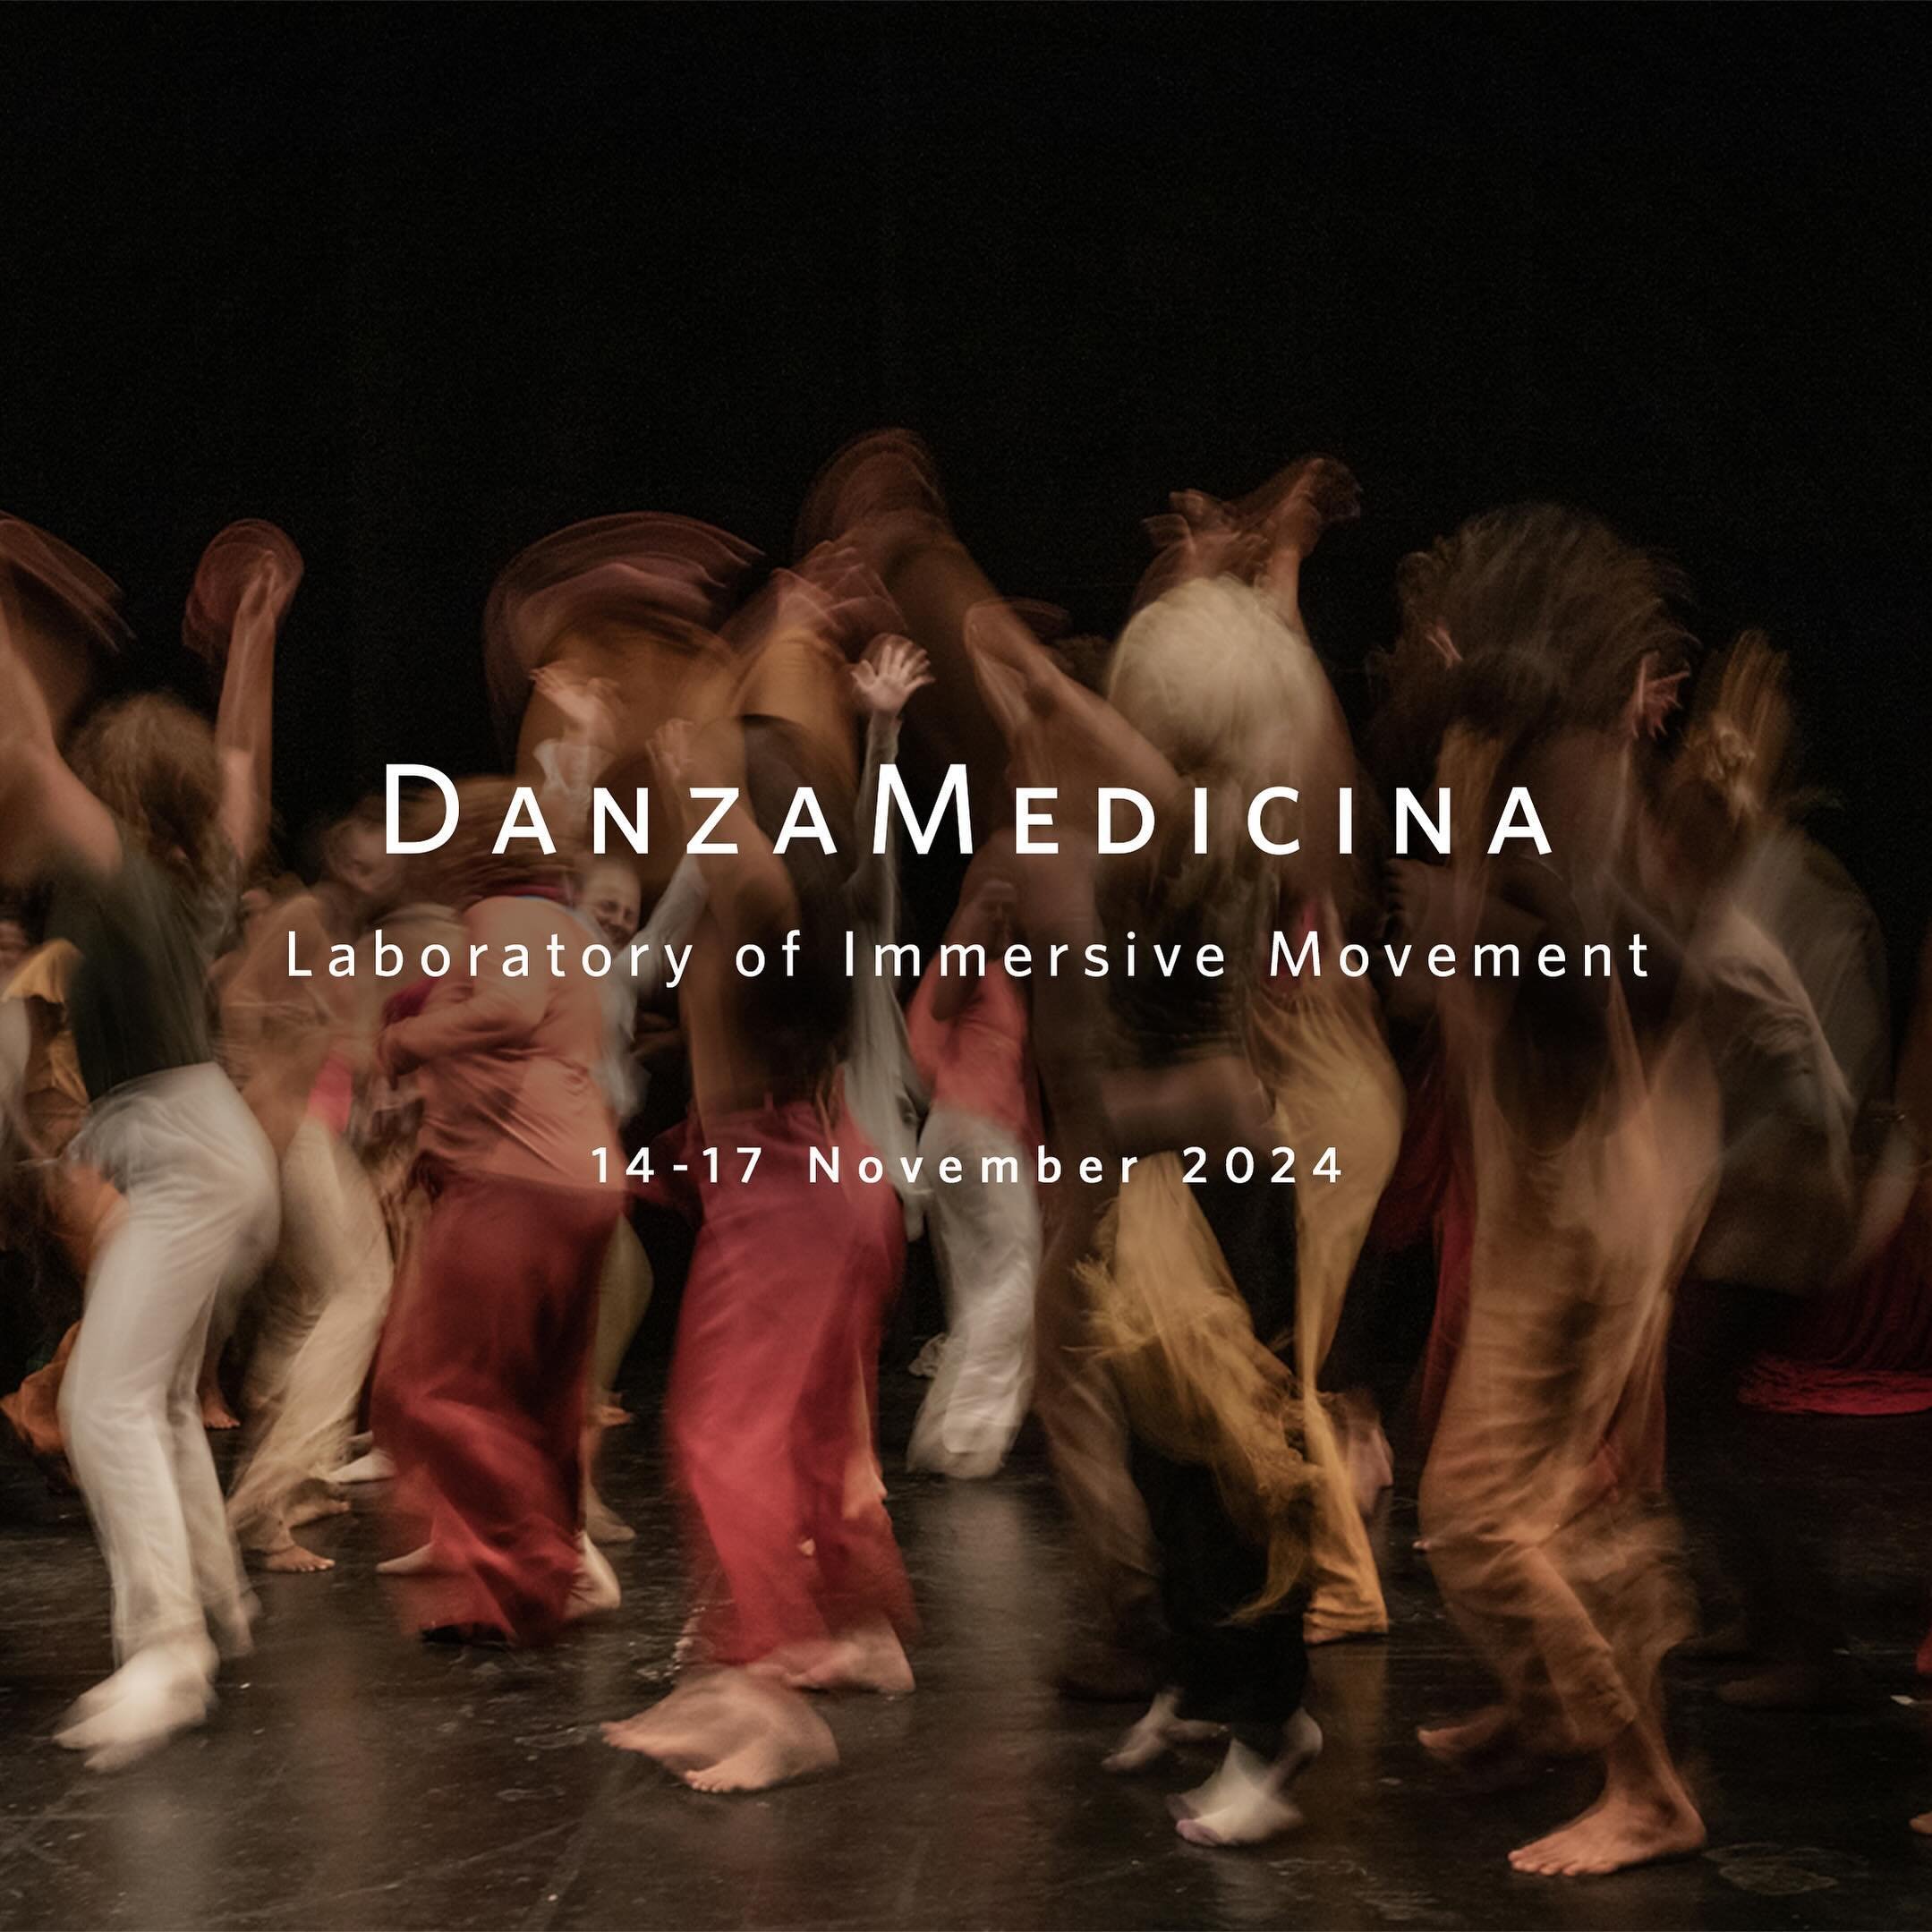 Join us on a journey to explore the singularity of the wild, worshiping nature as a ritualistic territory to summon and reconnect with the knowledge of the body. 

DanzaMedicina is an act against the collective anesthesia, the silencing of our instin